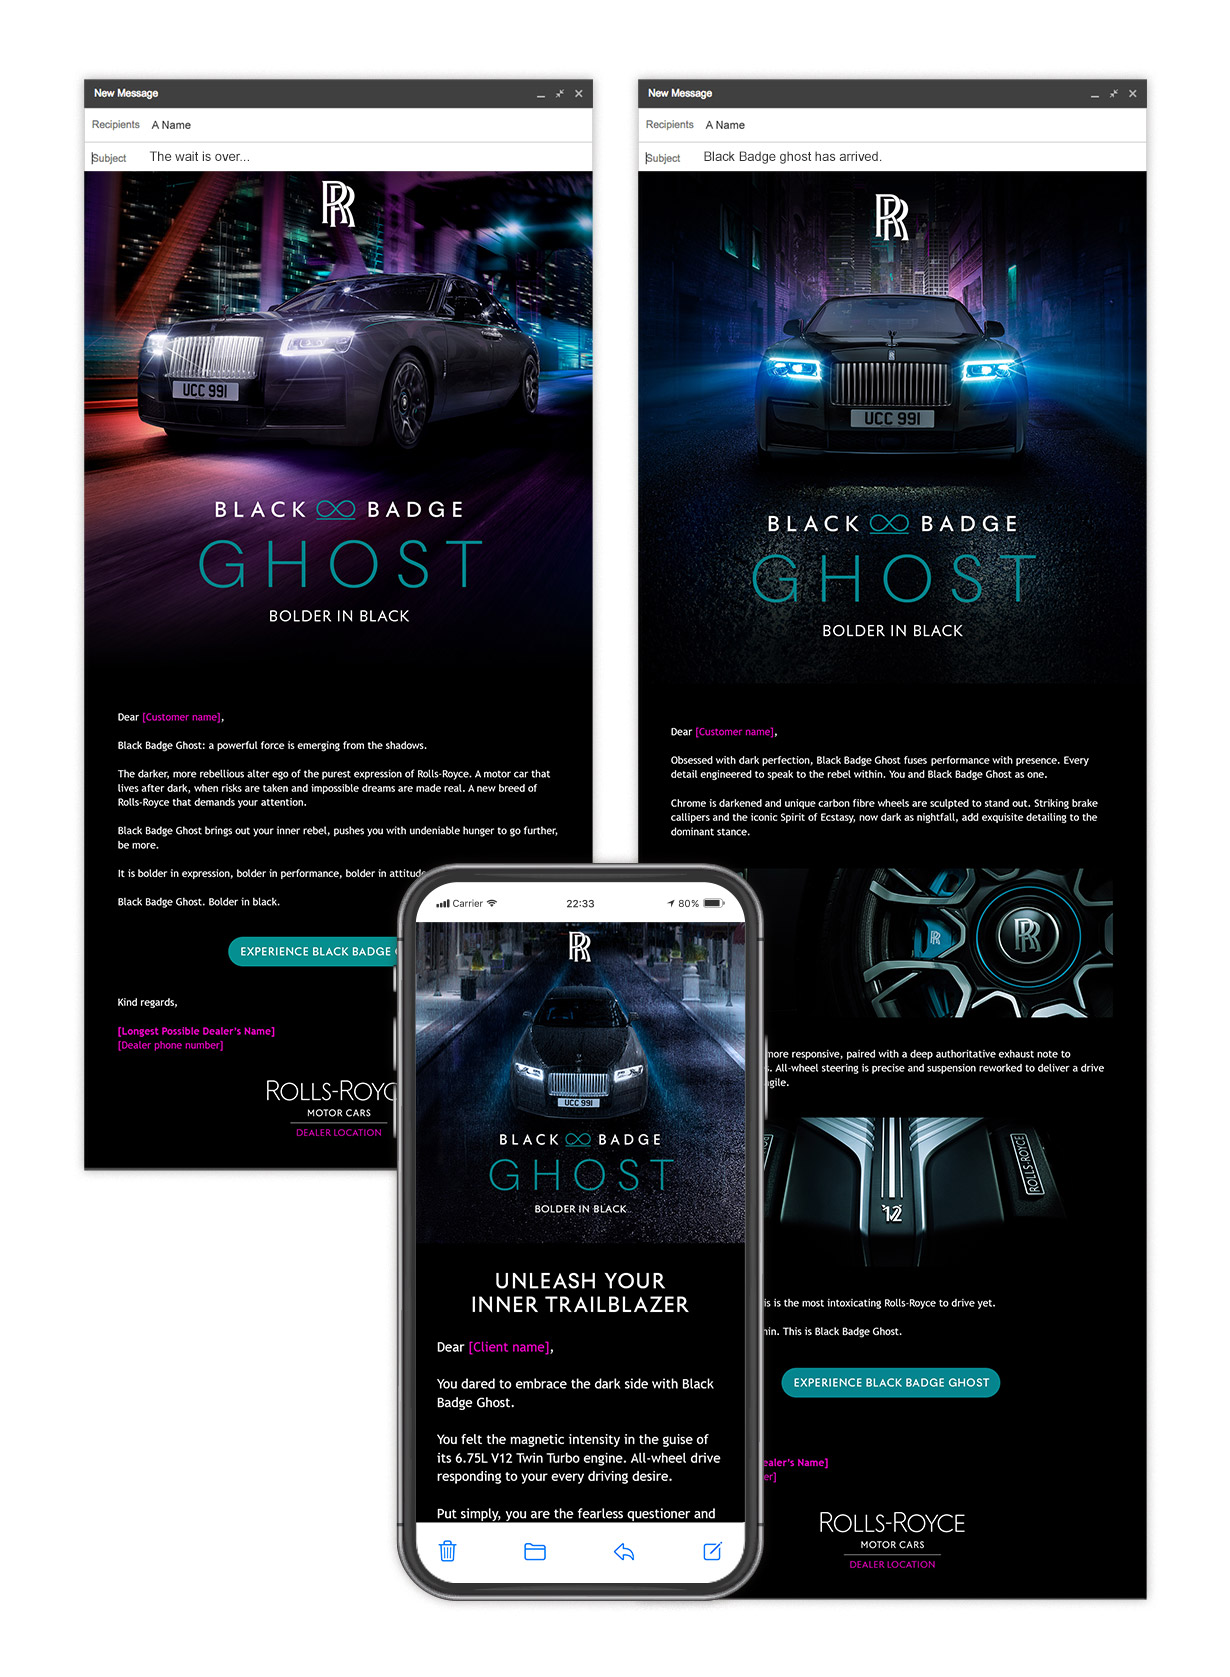 Black Badge Ghost launch emails